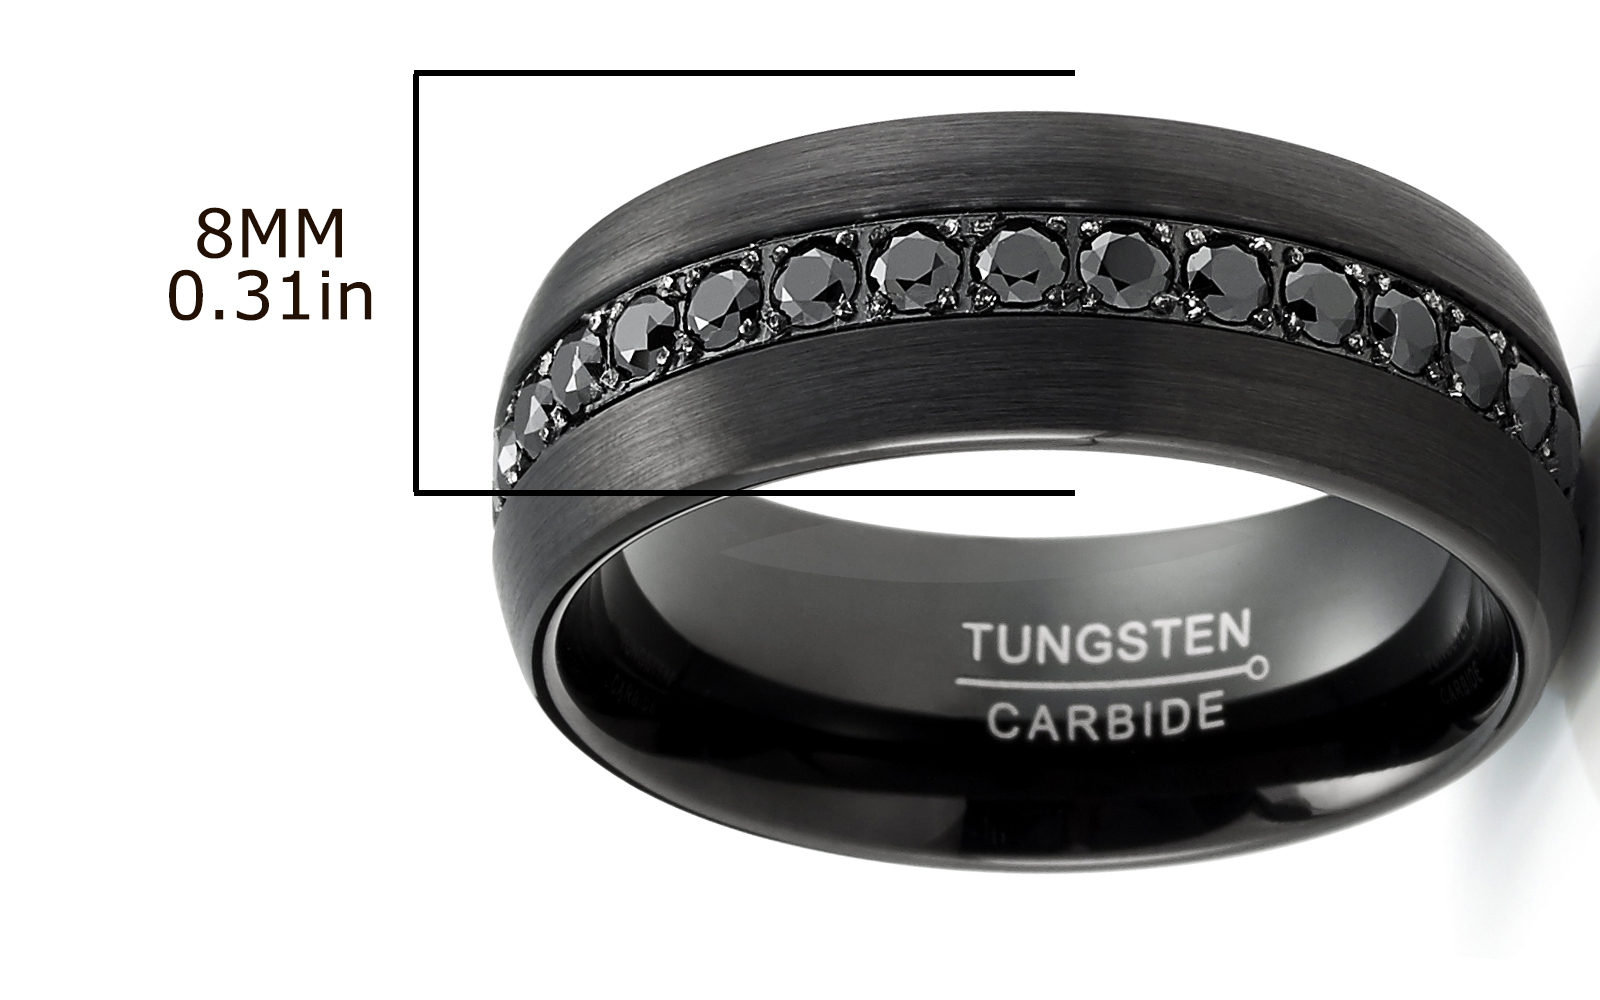 Metal Masters Co. Tungsten Carbide Mens Ring Wedding Band Black Round 1.7Ct SImulated DIamond CZ Cubic Zirconia 8MM Comfort-Fit Black